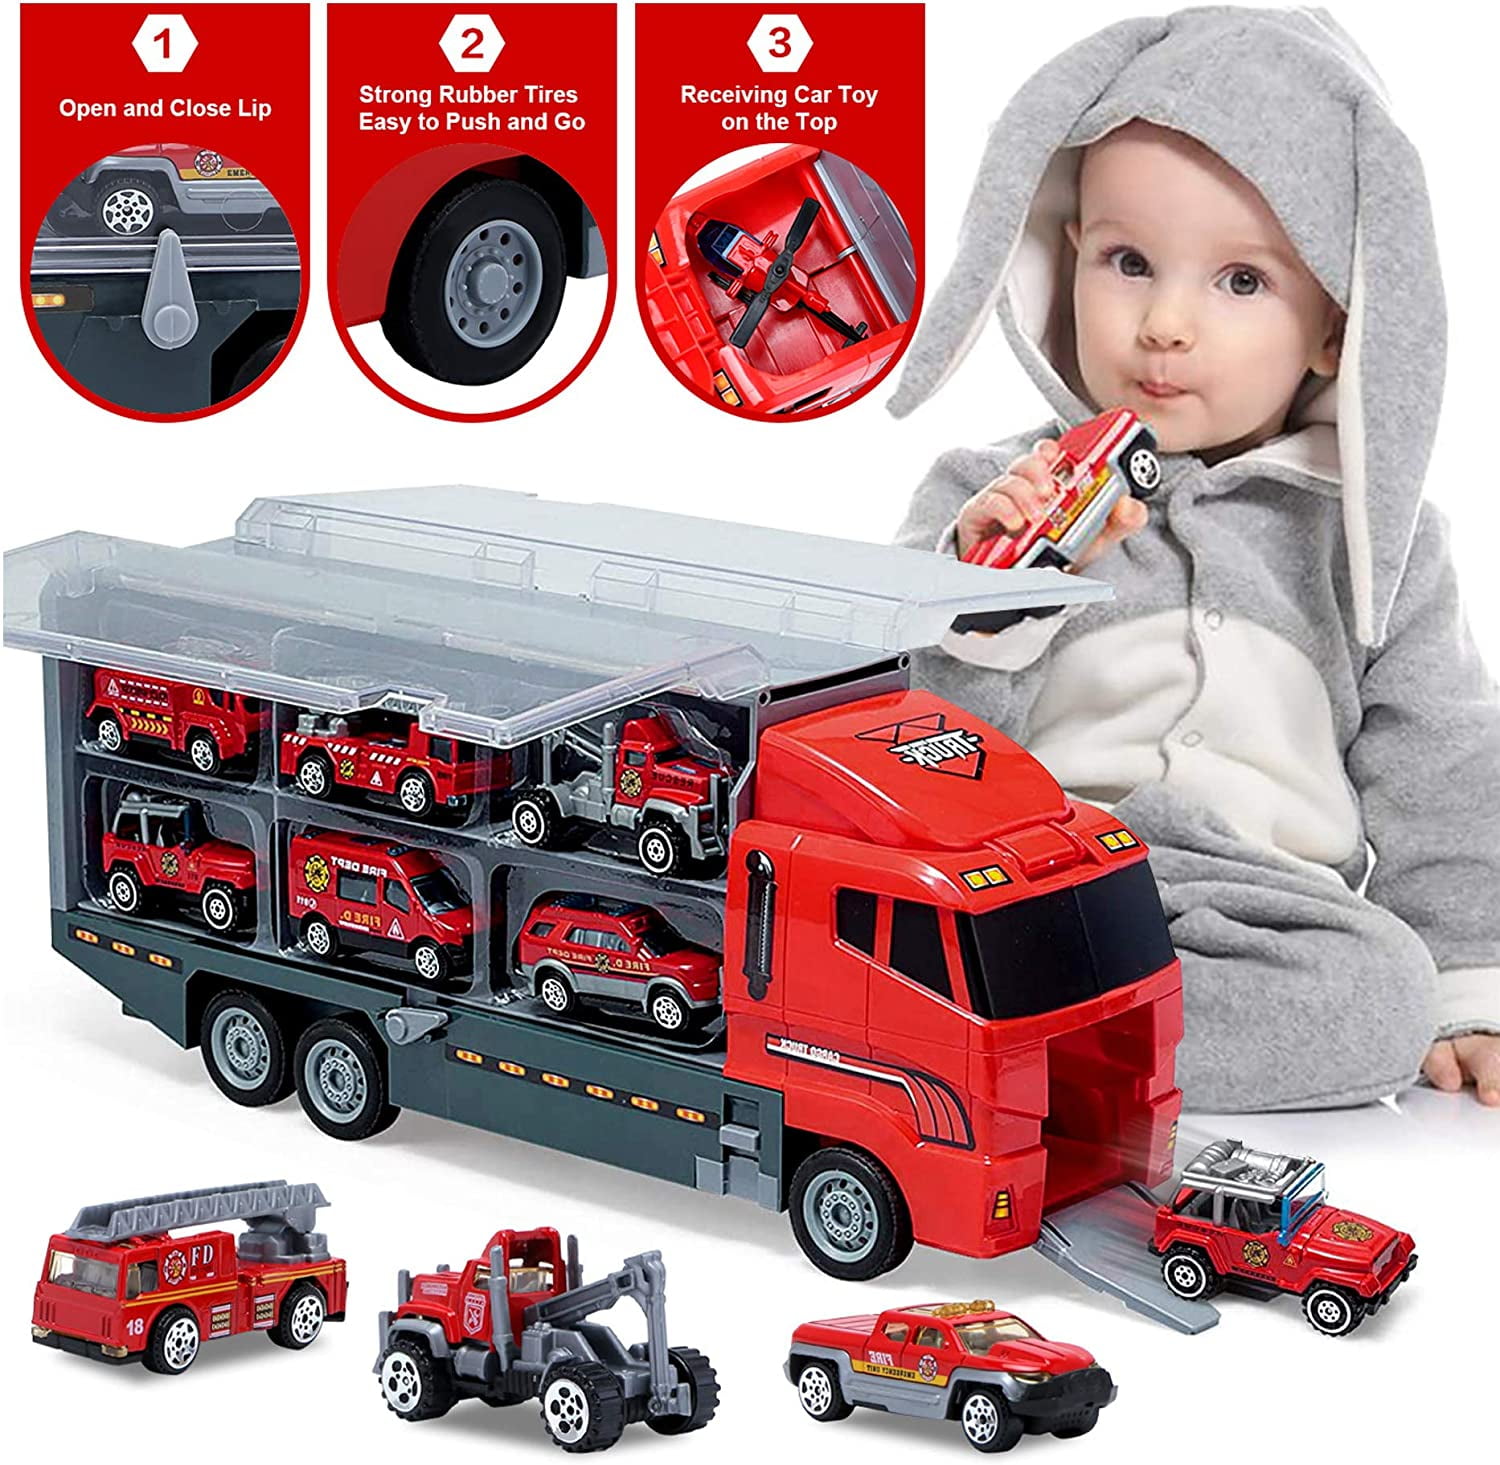 Boys 9pieces Creative 1:64 Fire Truck Toy Cars Model Party Favors for Kids 